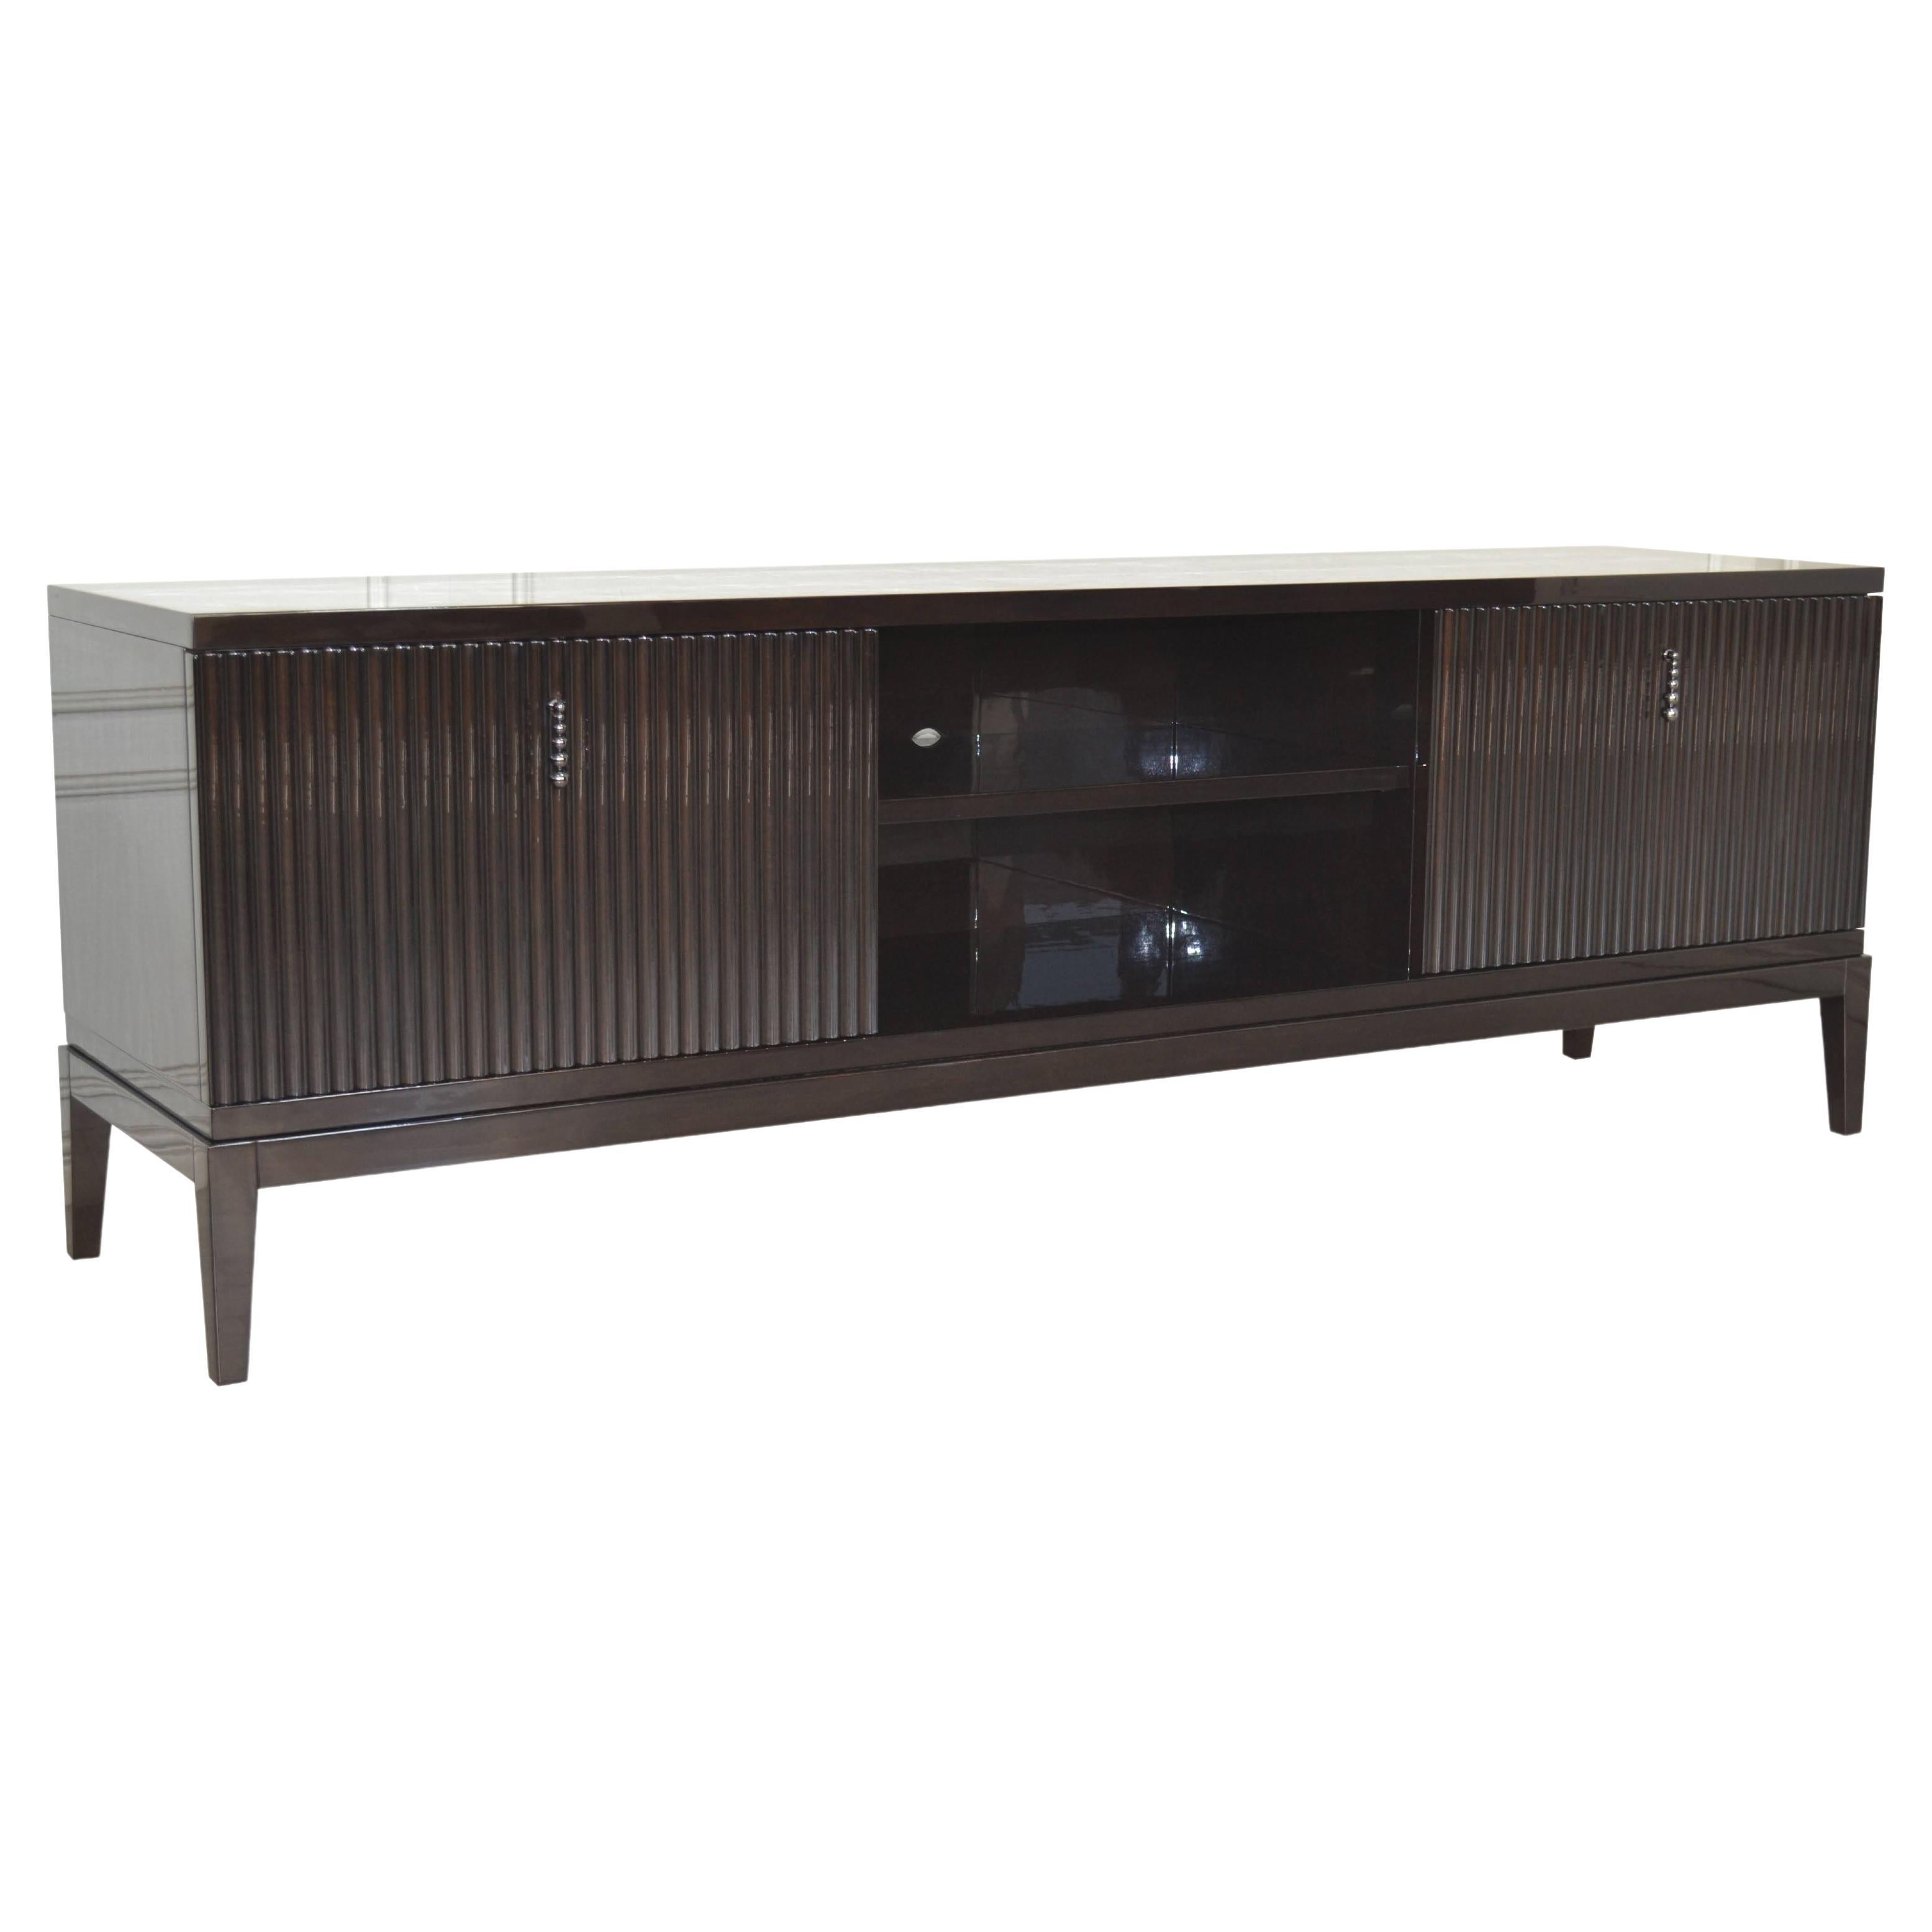 Italian Tv Sideboard in Ebony Brown Color with Drawers